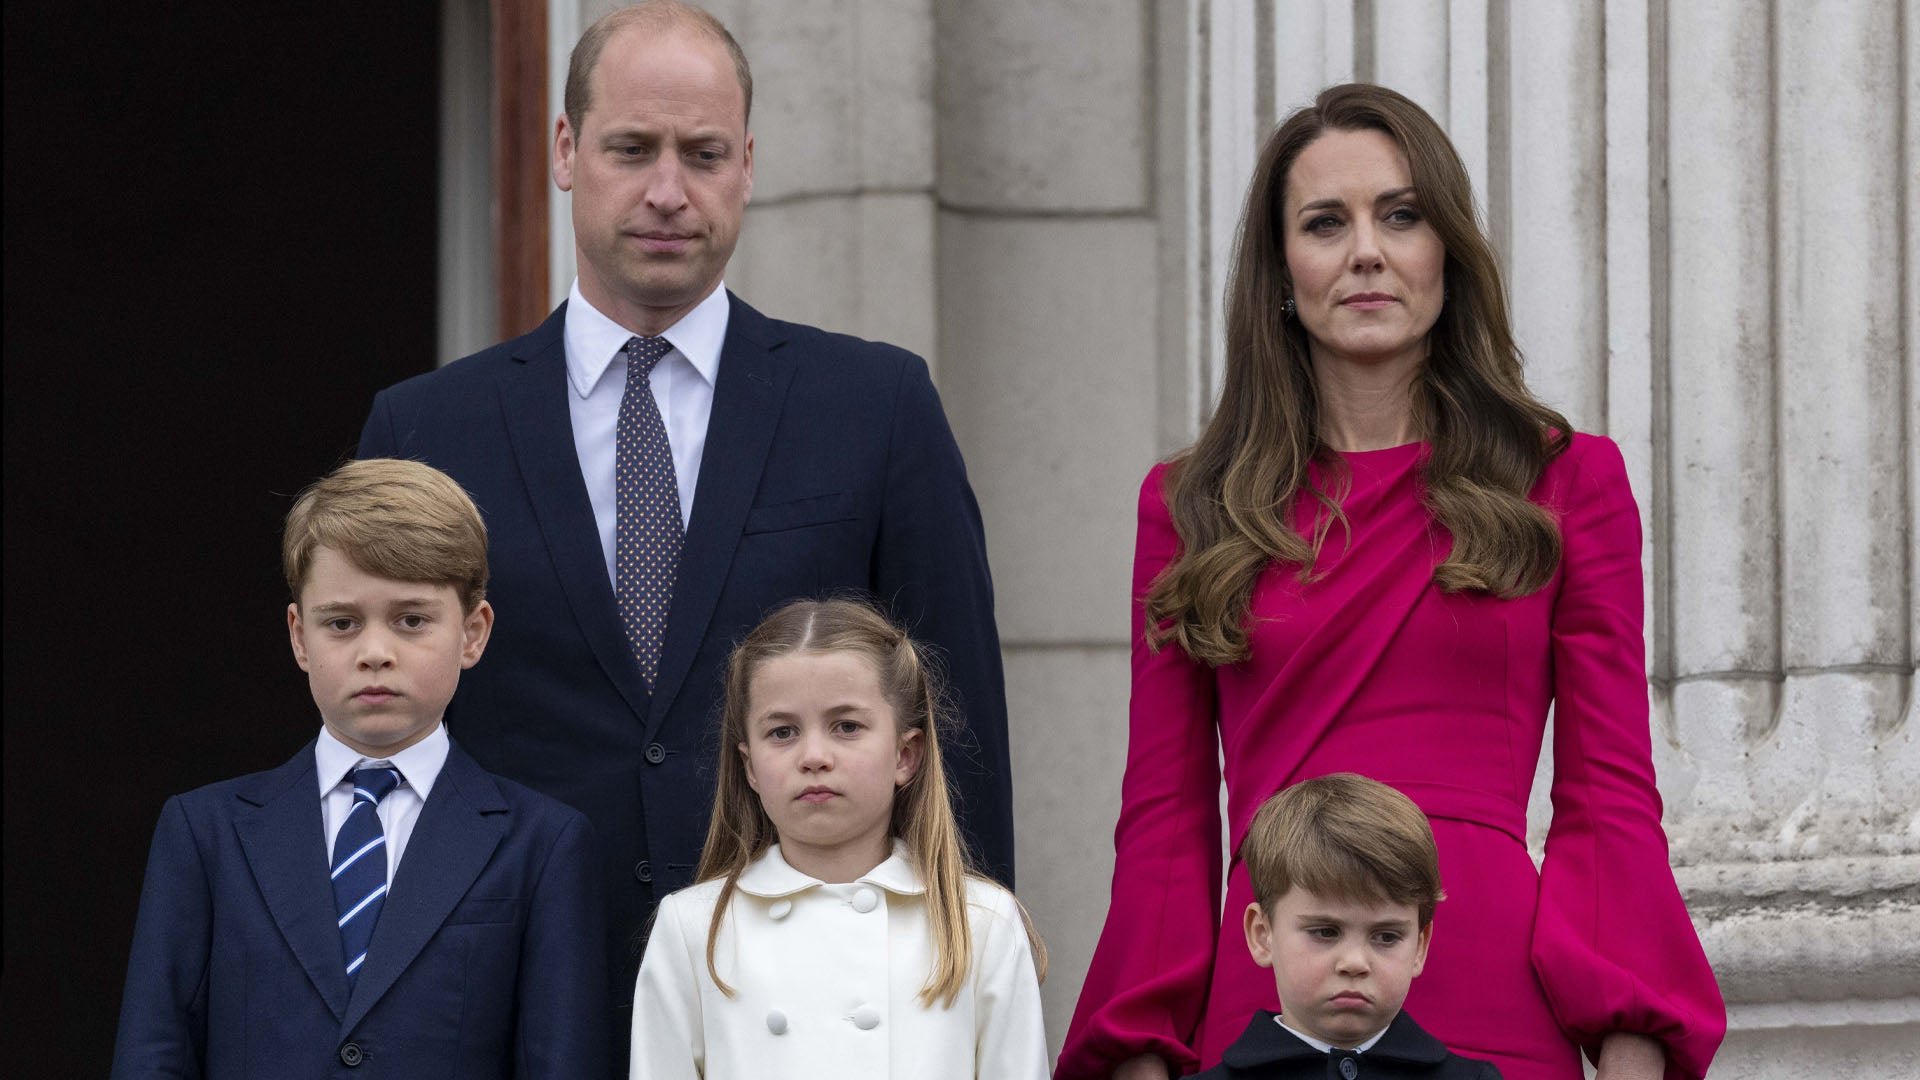 Where Kate Middleton & Prince William Are Spending Easter With Kids Amid Cancer Diagnosis